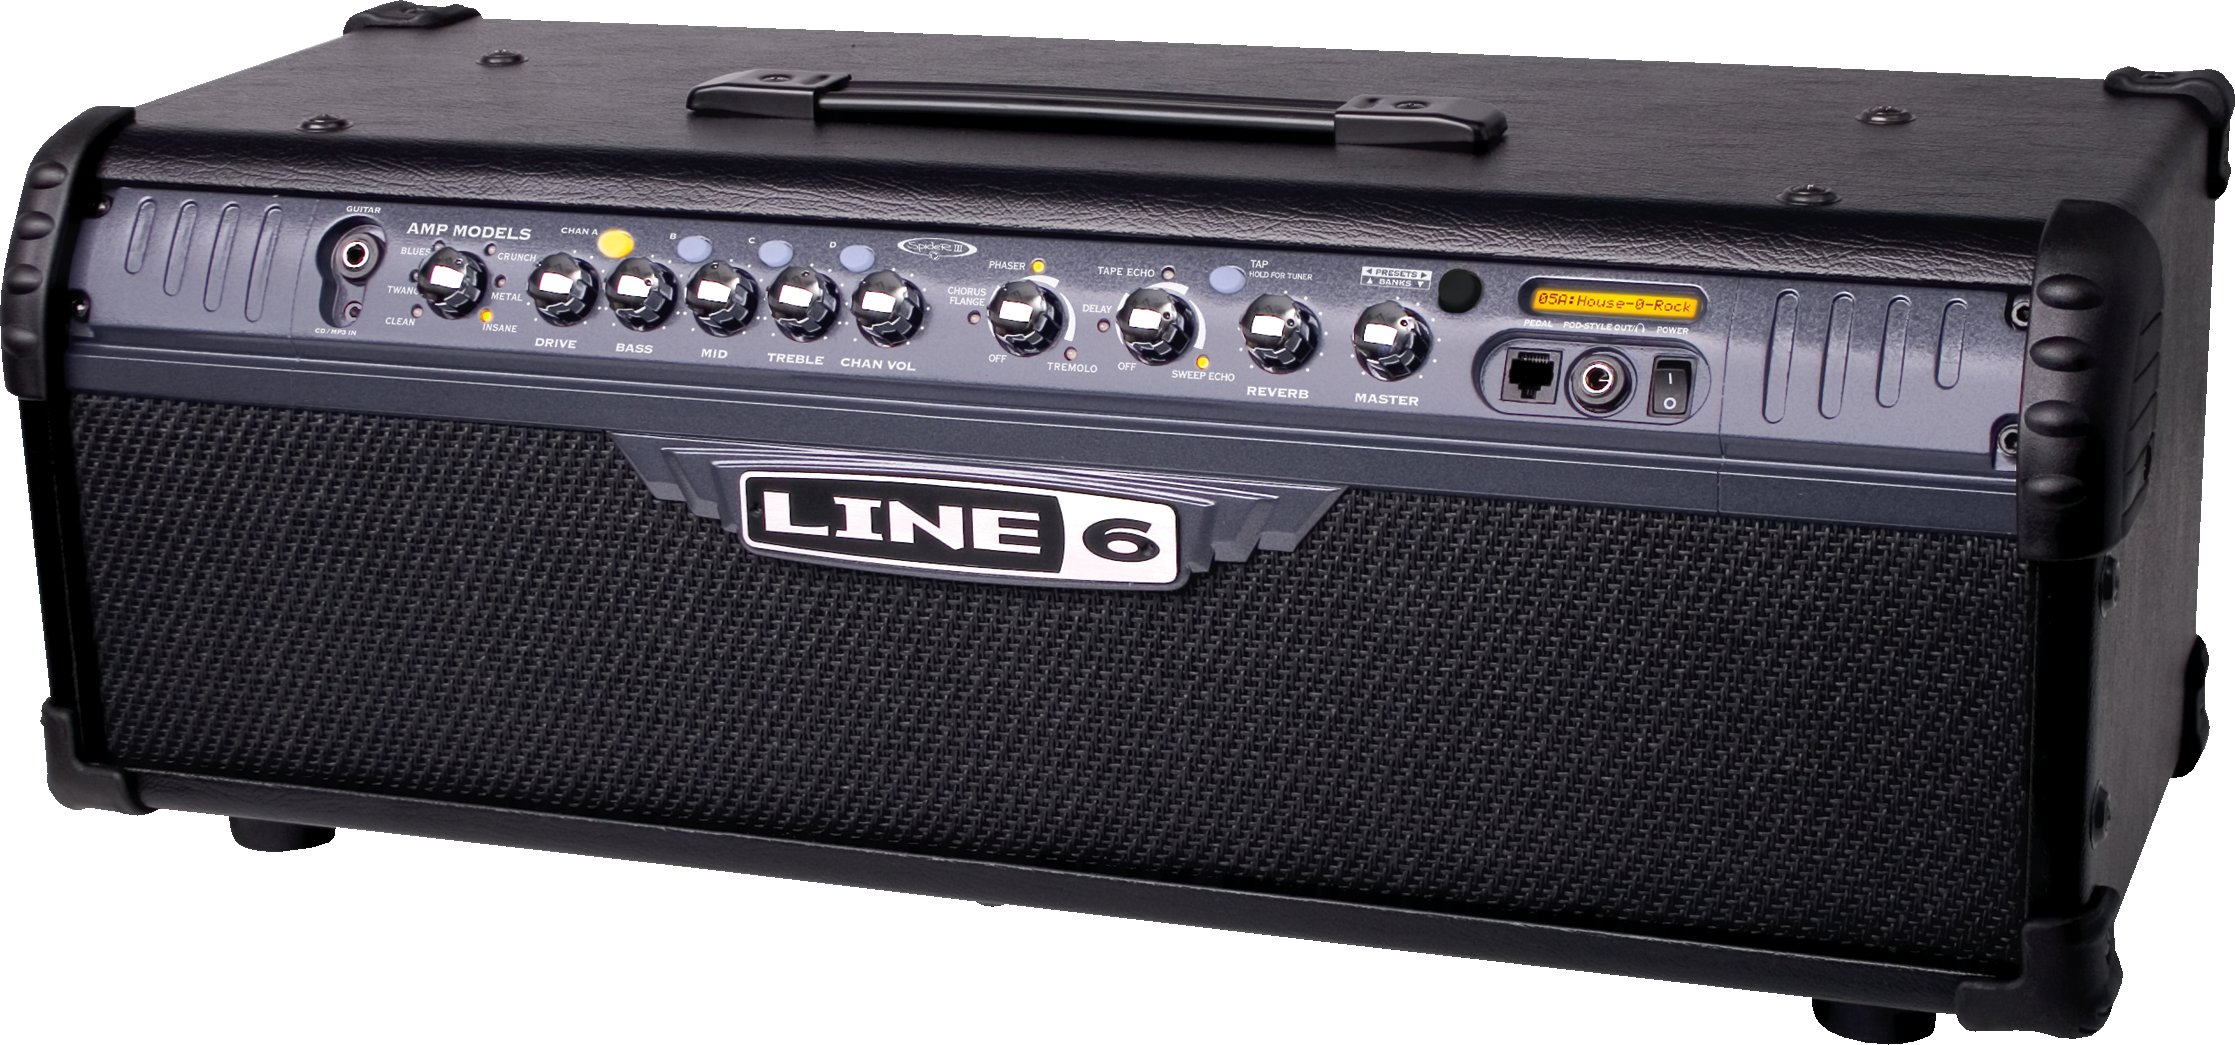 Line 6 Spider Iii 150 Head Review